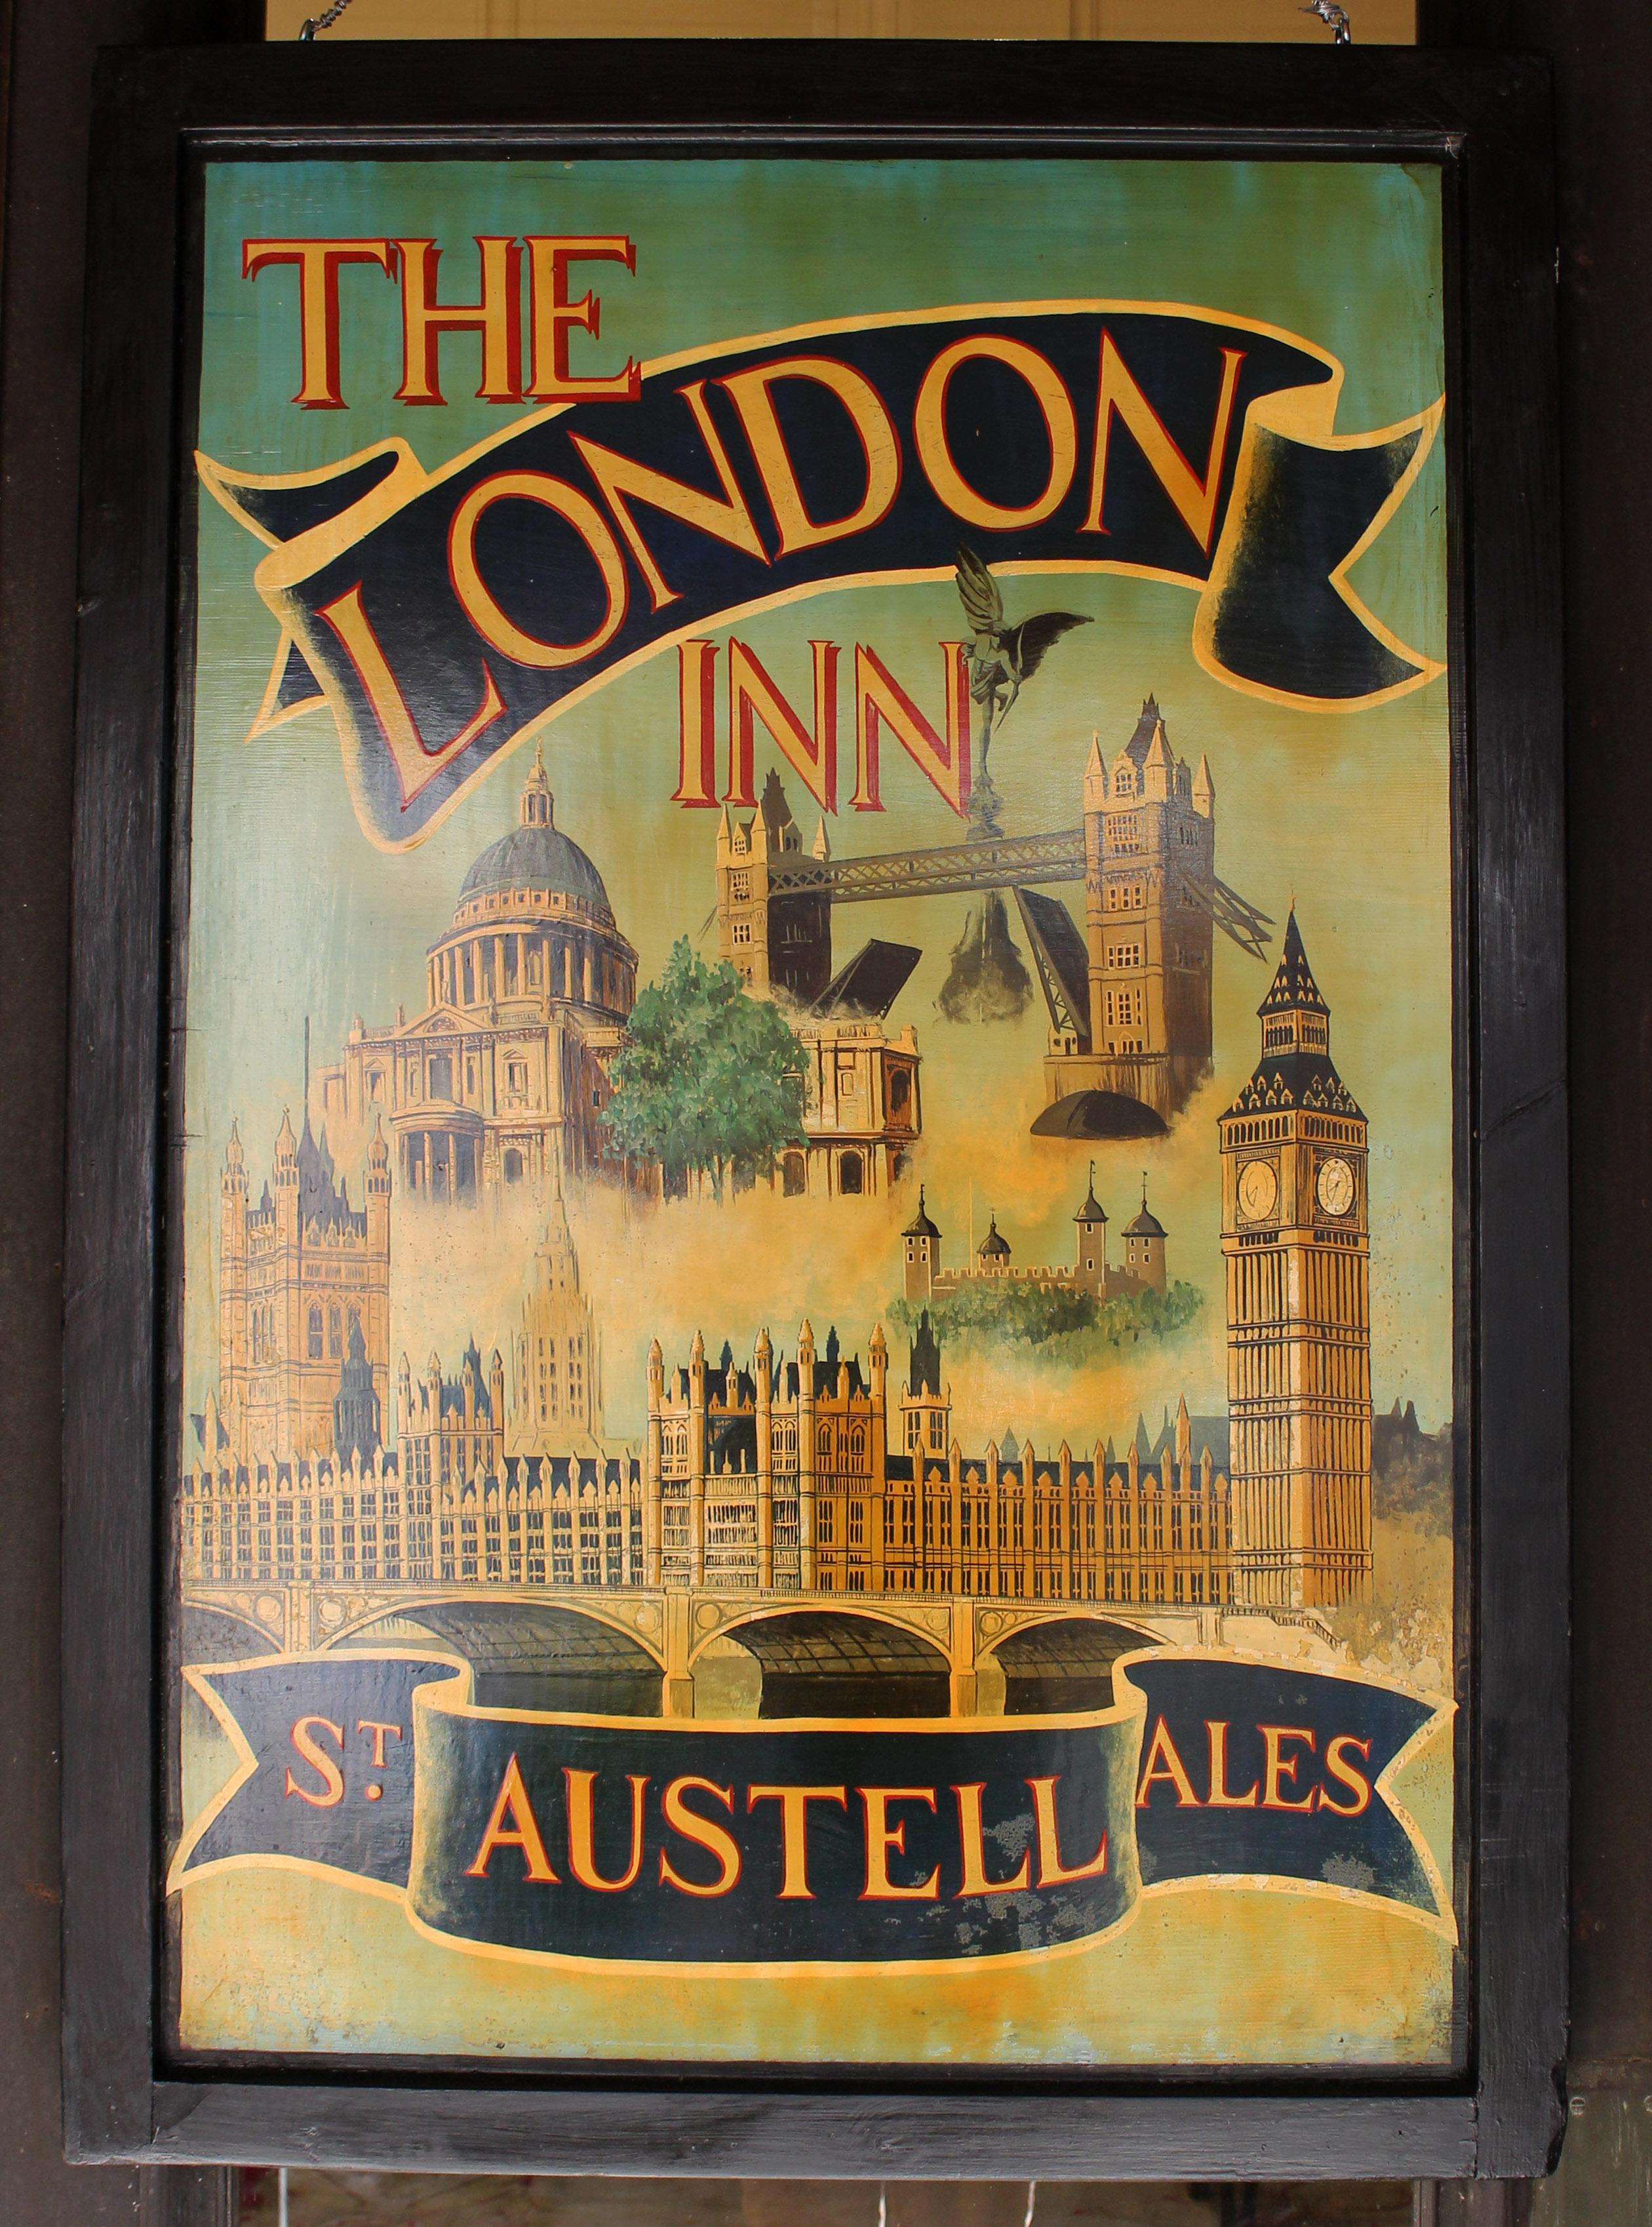 Vintage English double-sided pub sign for 